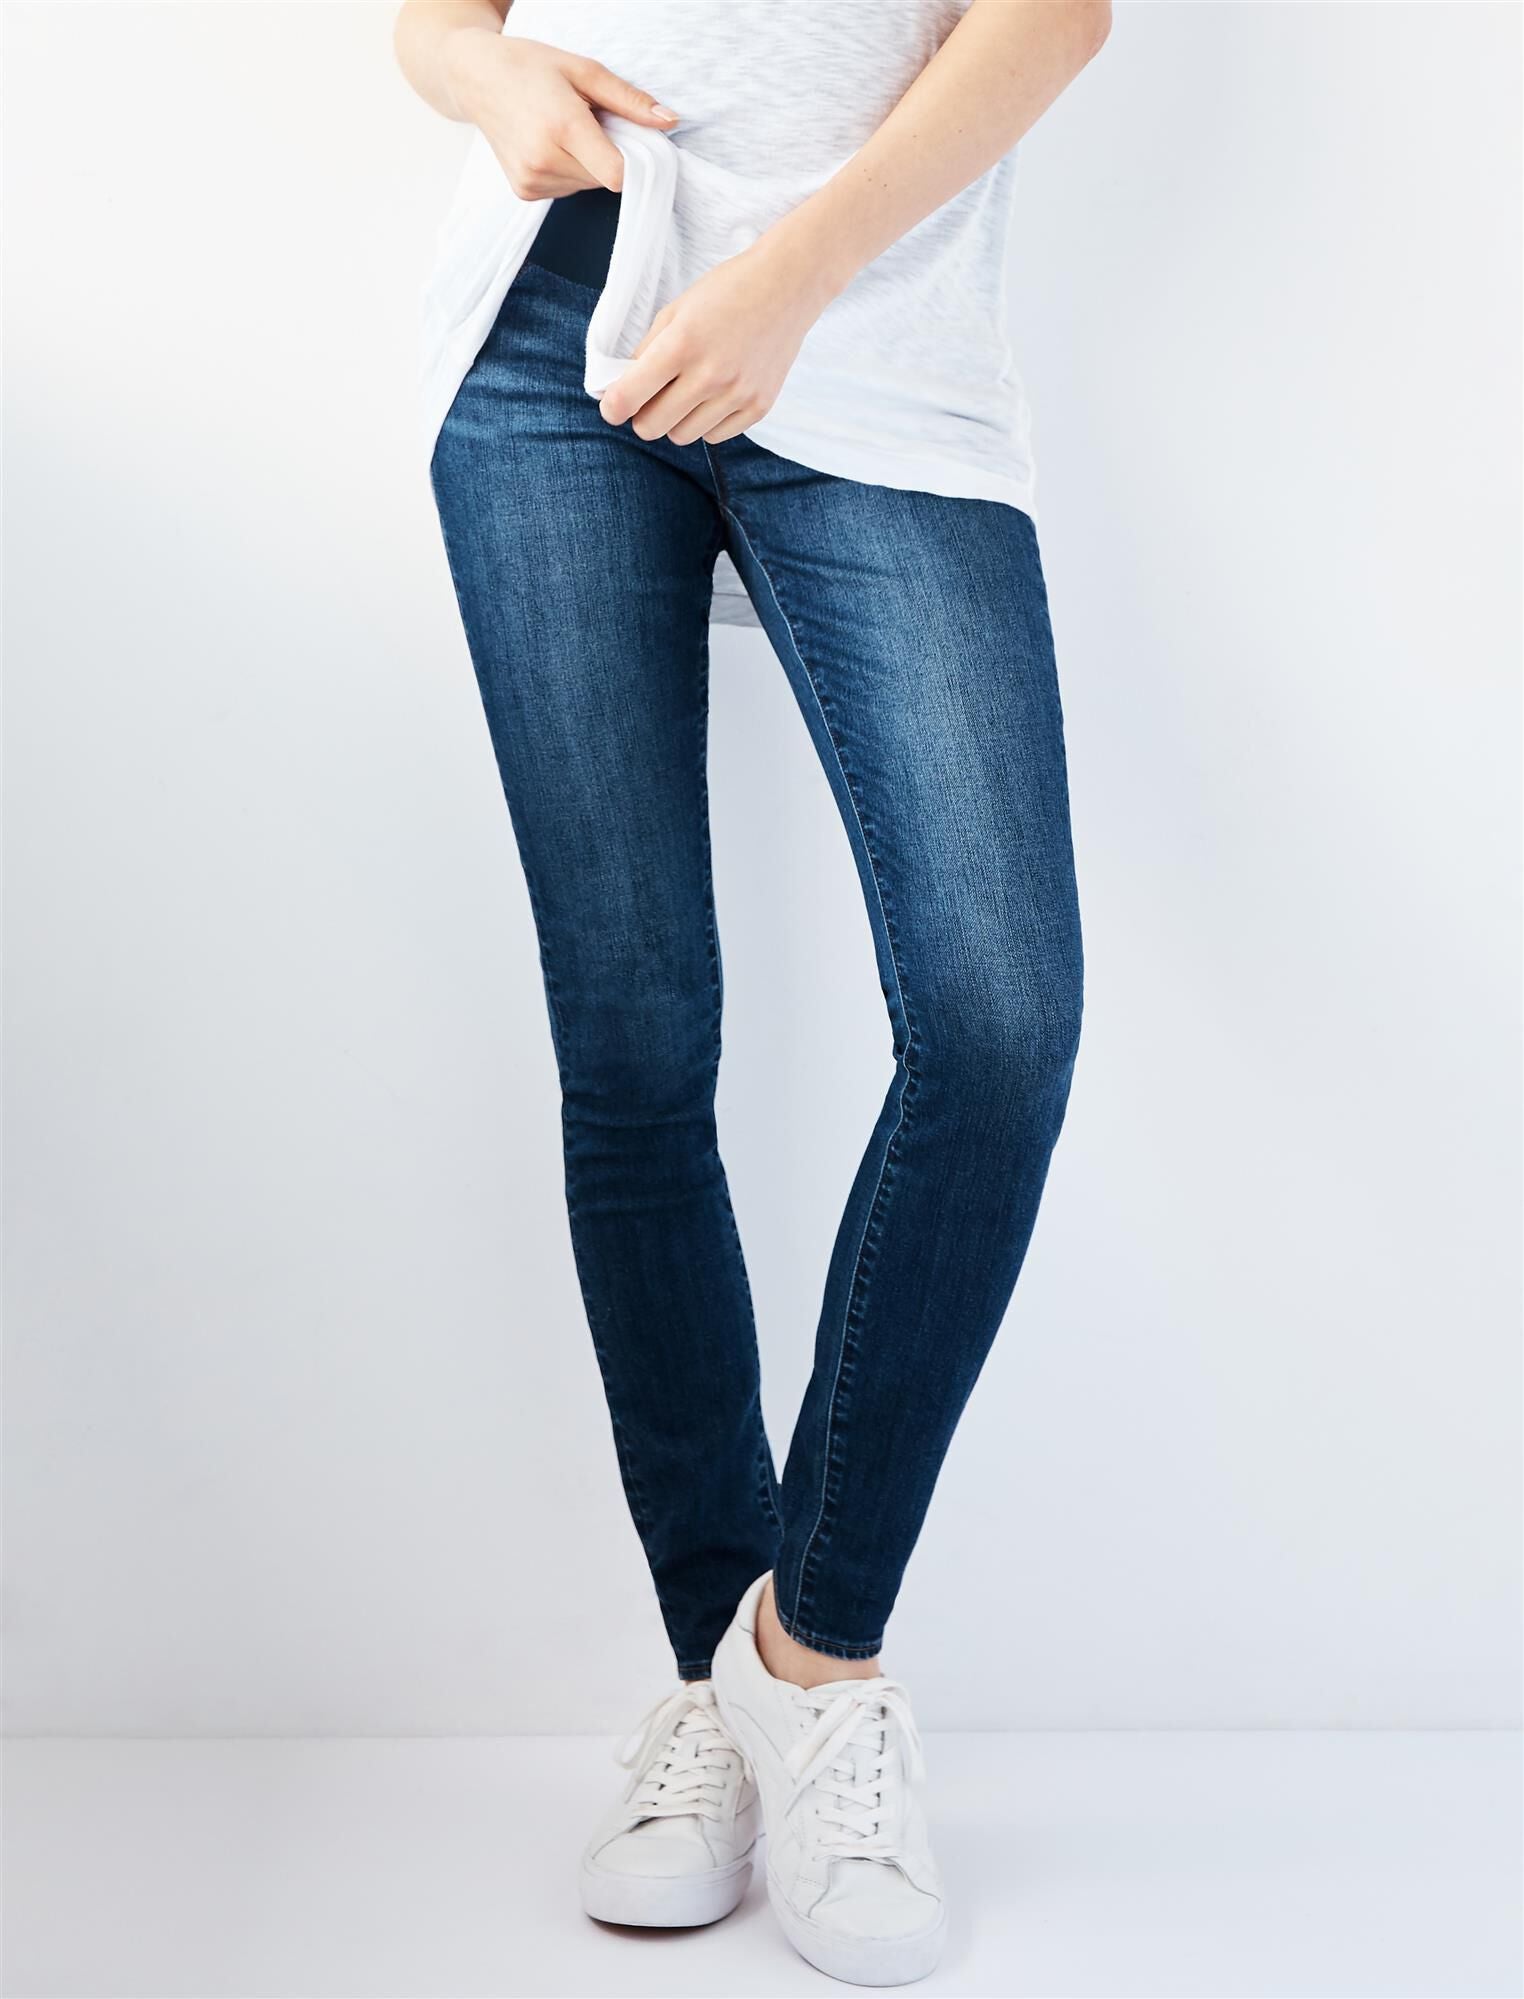 Articles Of Society Maternity Jeans Review